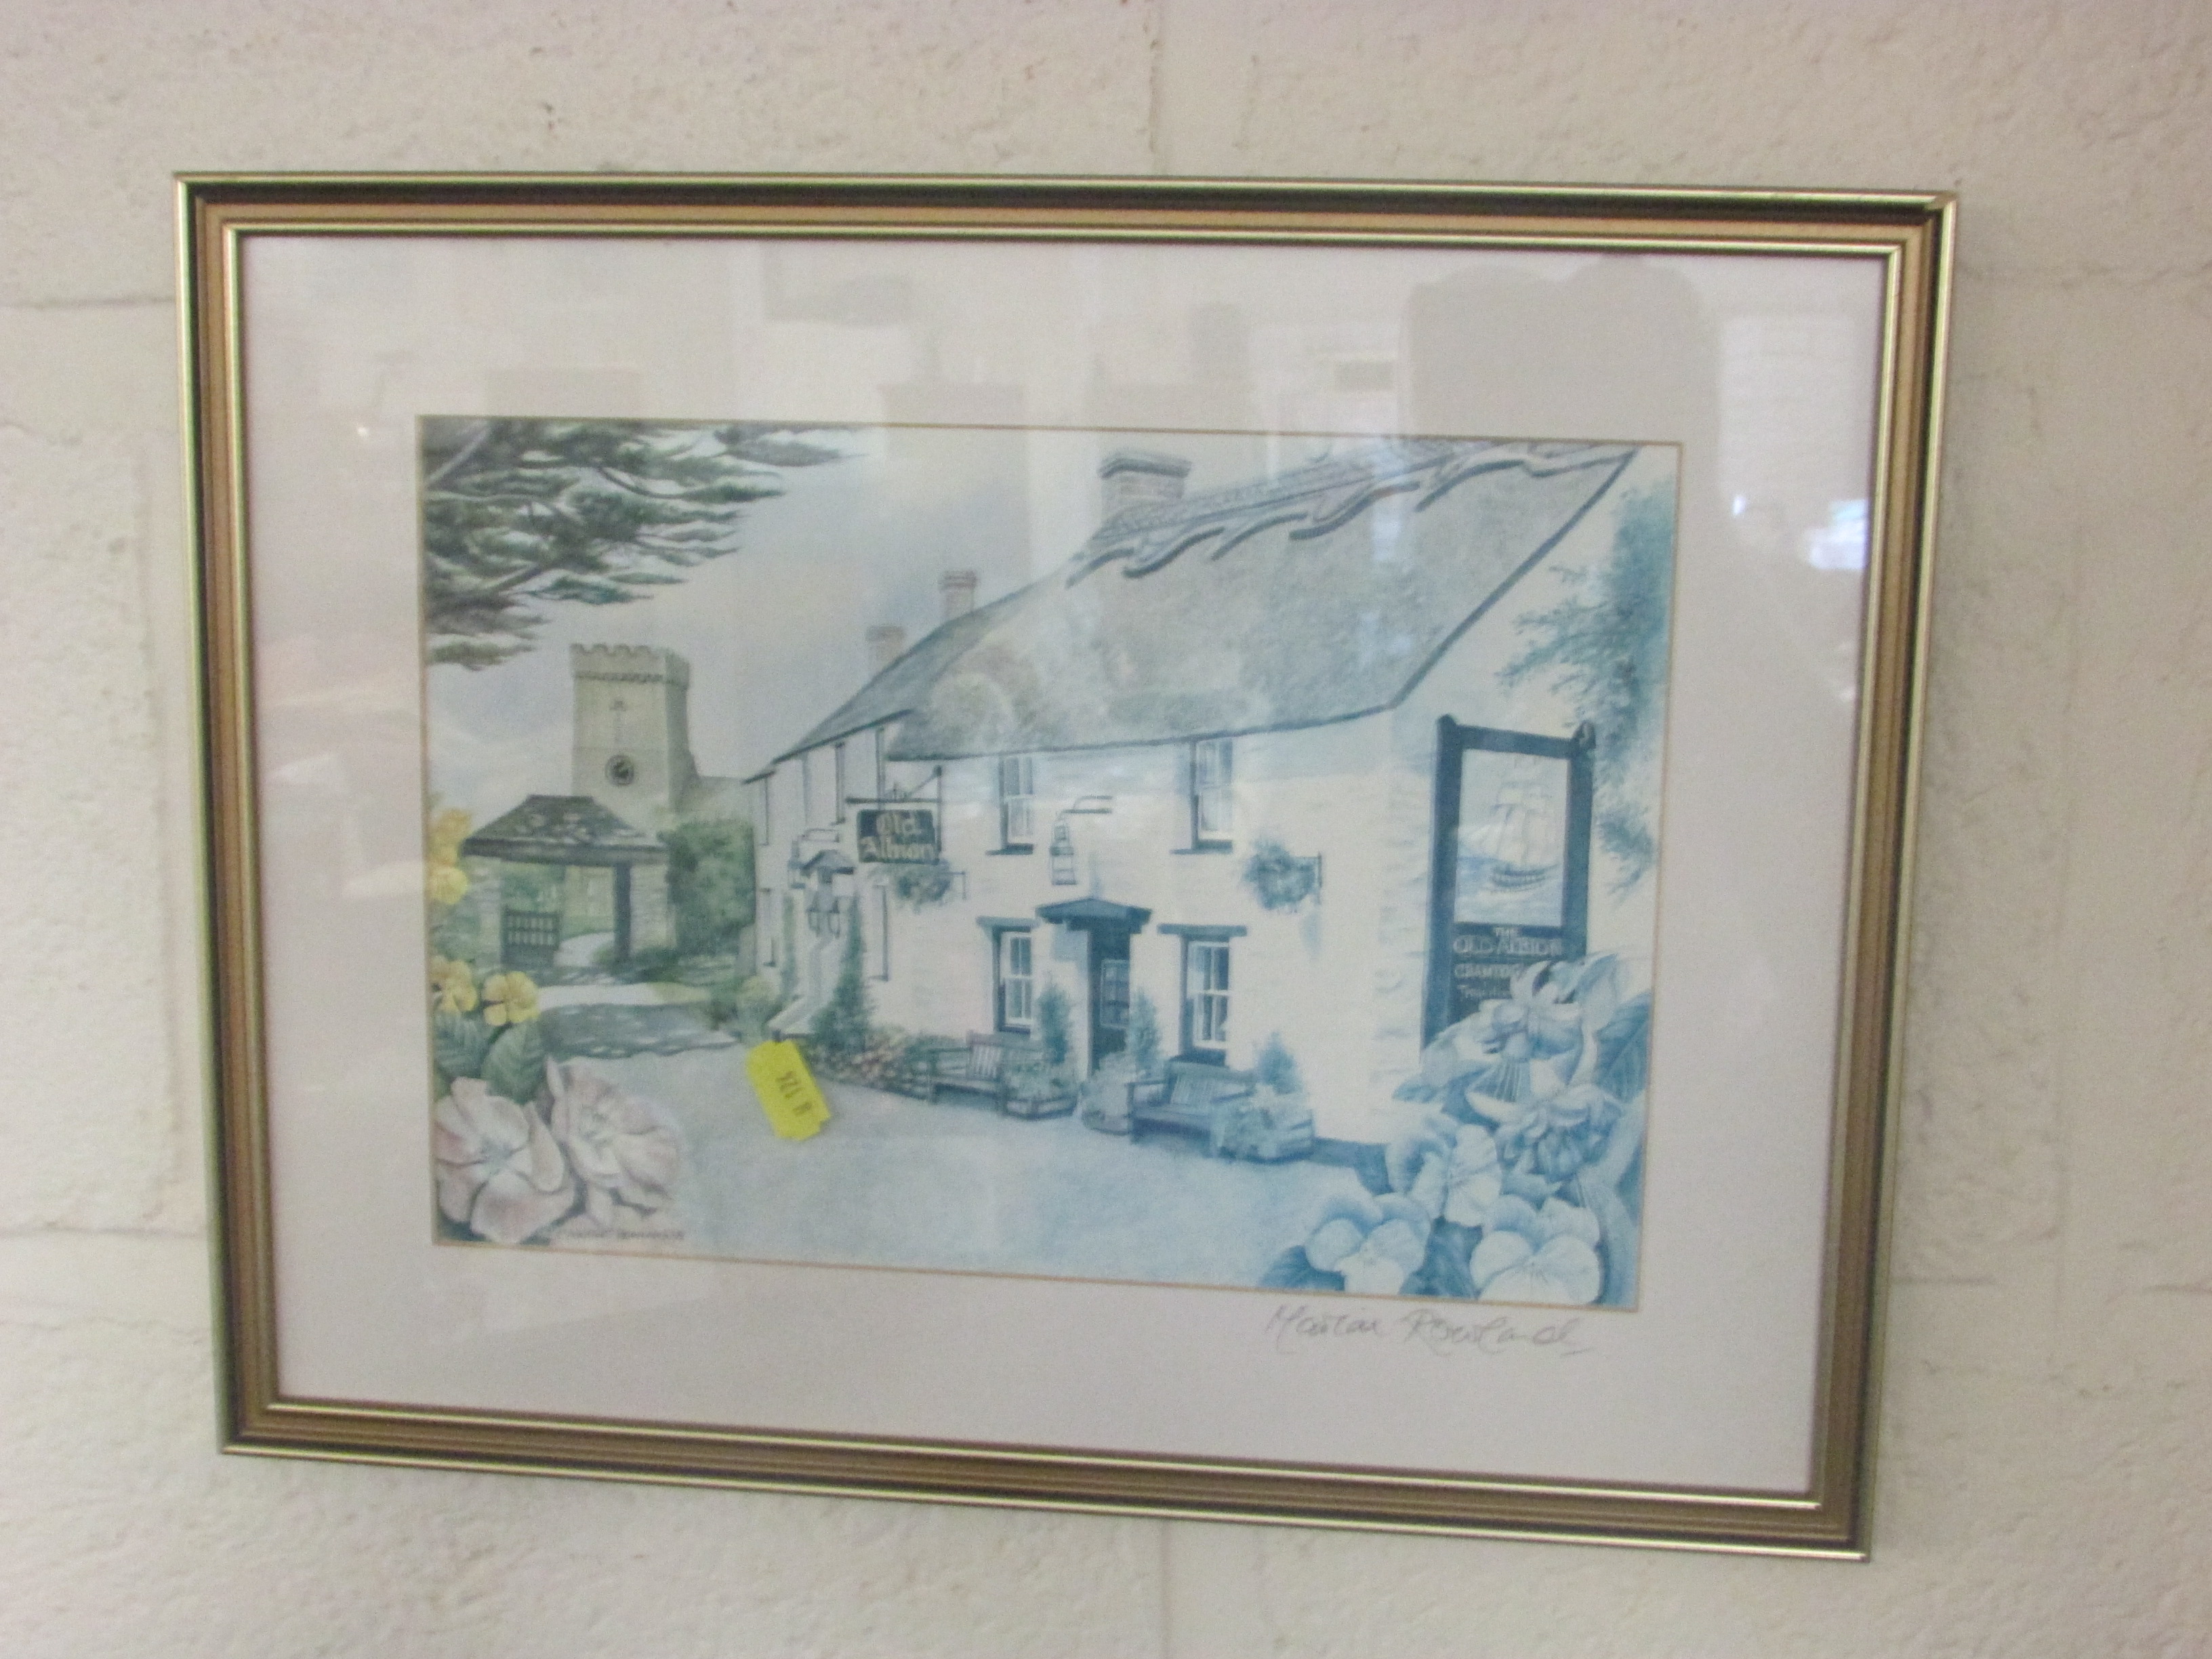 FRAMED WATERCOLOUR OF SUNRISE OVER HILL, AND FRAMED PRINT OF VILLAGE STREET - Image 3 of 3